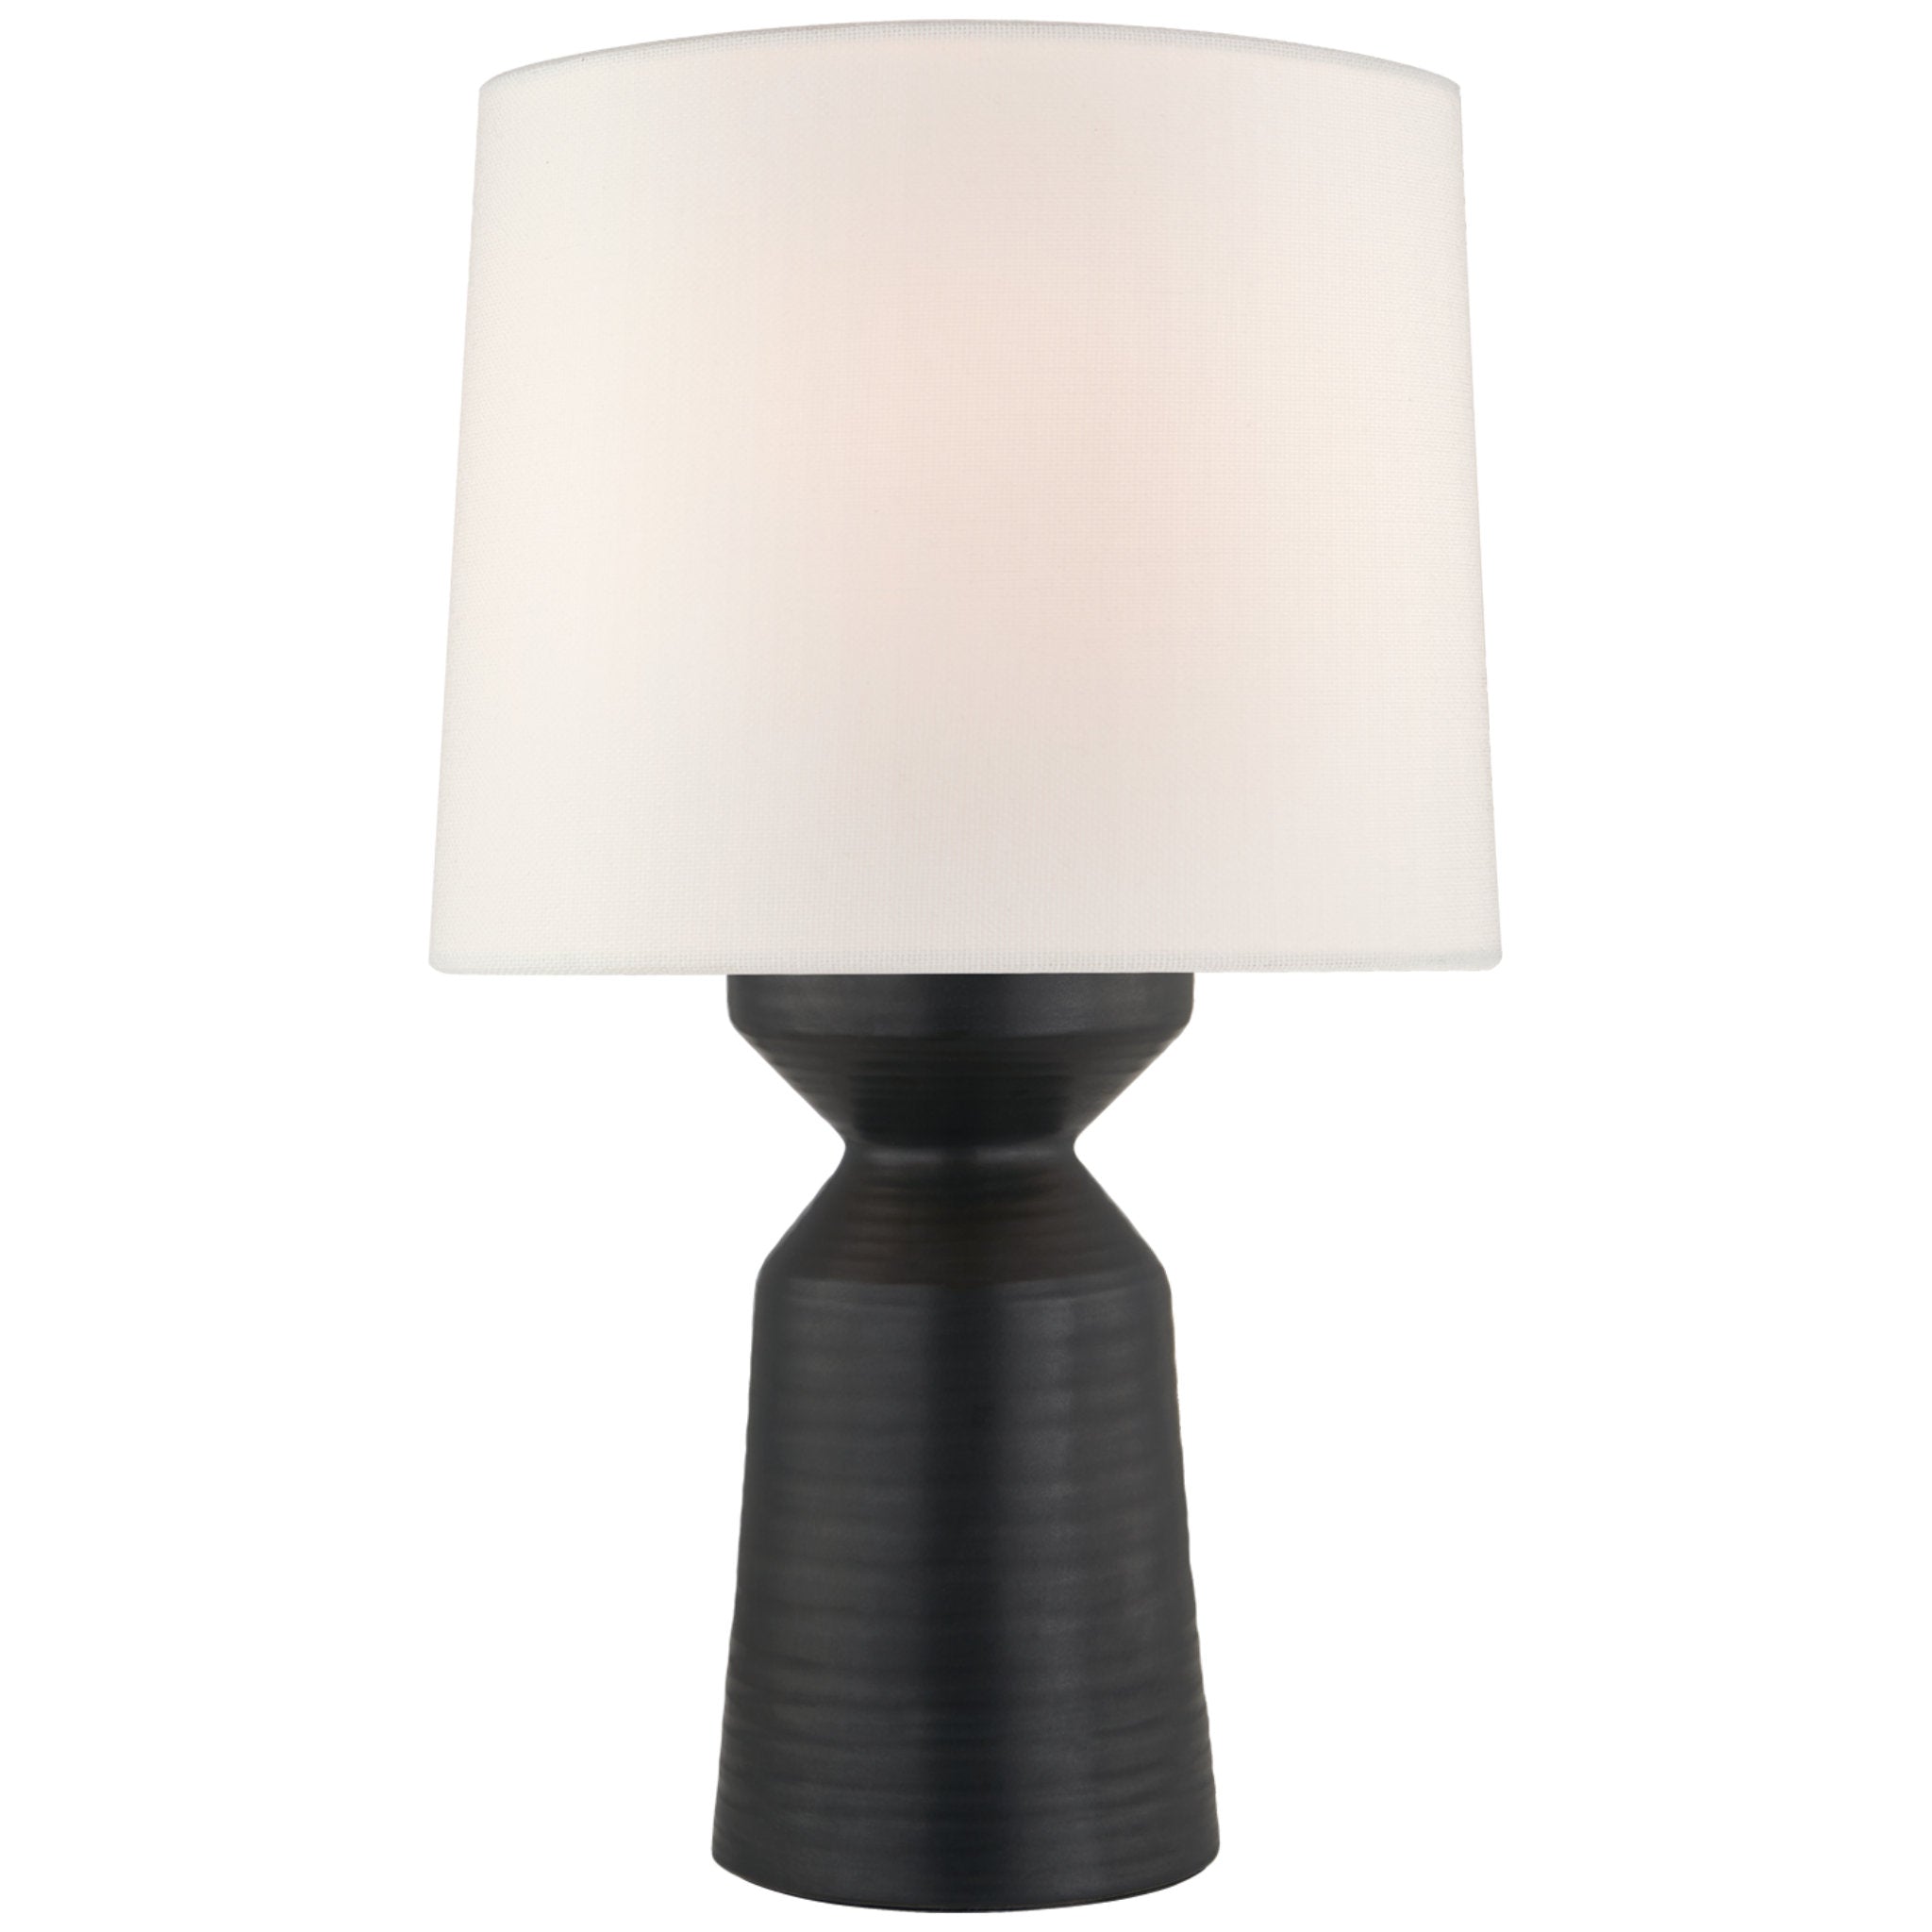 Kelly Wearstler Nero Large Table Lamp in Matte Black with Linen Shade